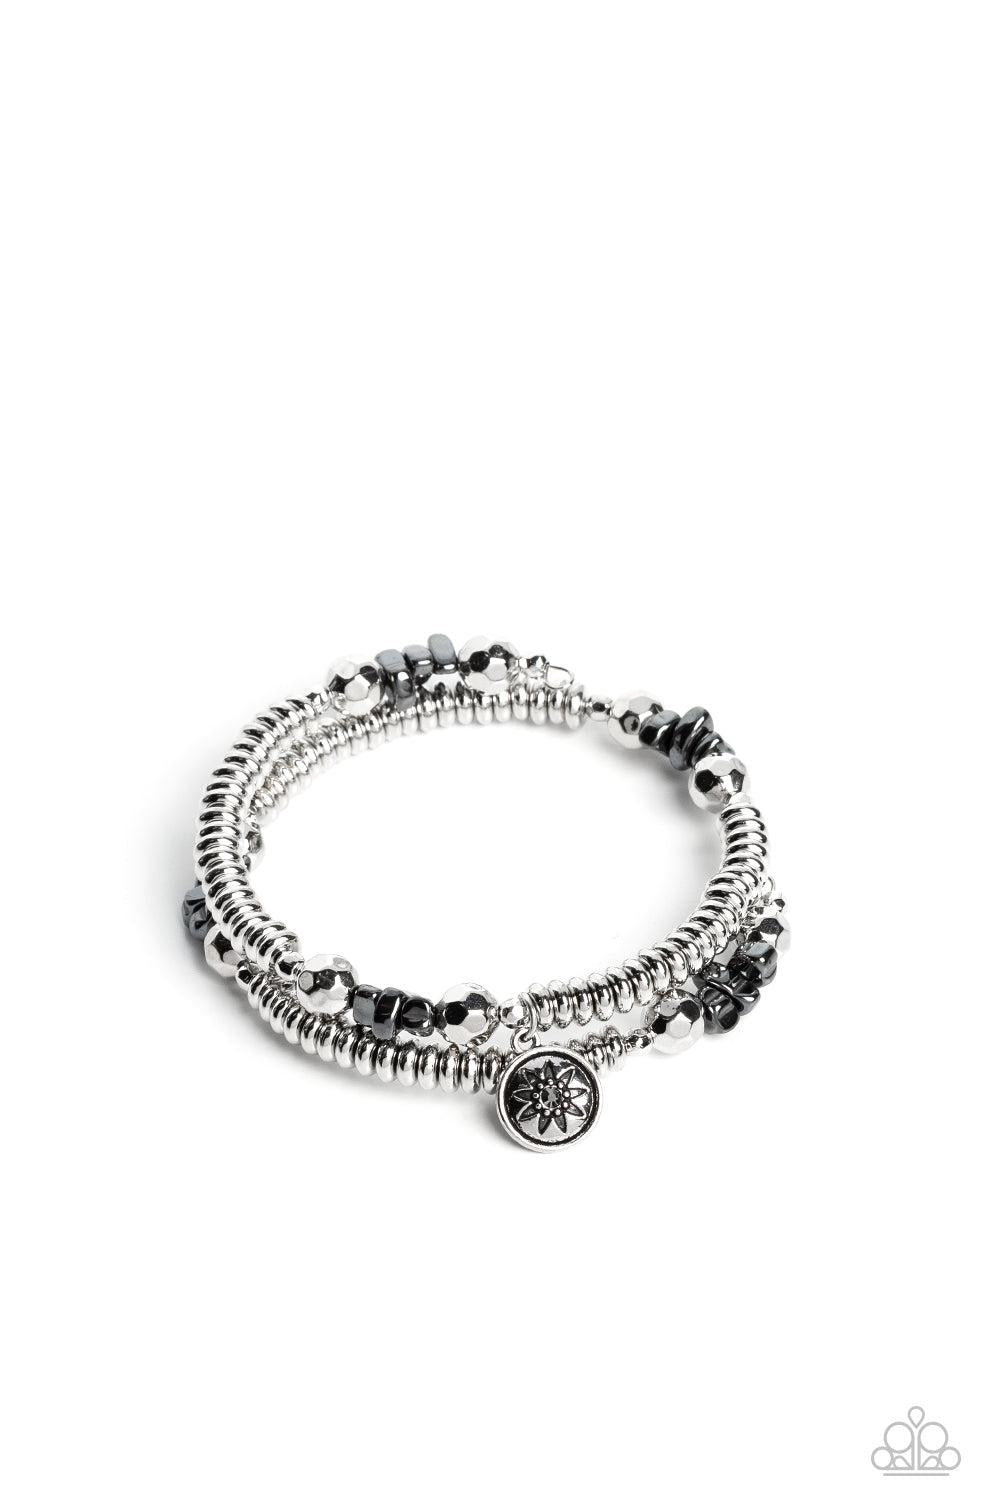 Handcrafted Heirloom Silver Infinity Wrap Bracelet - Paparazzi Accessories- lightbox - CarasShop.com - $5 Jewelry by Cara Jewels